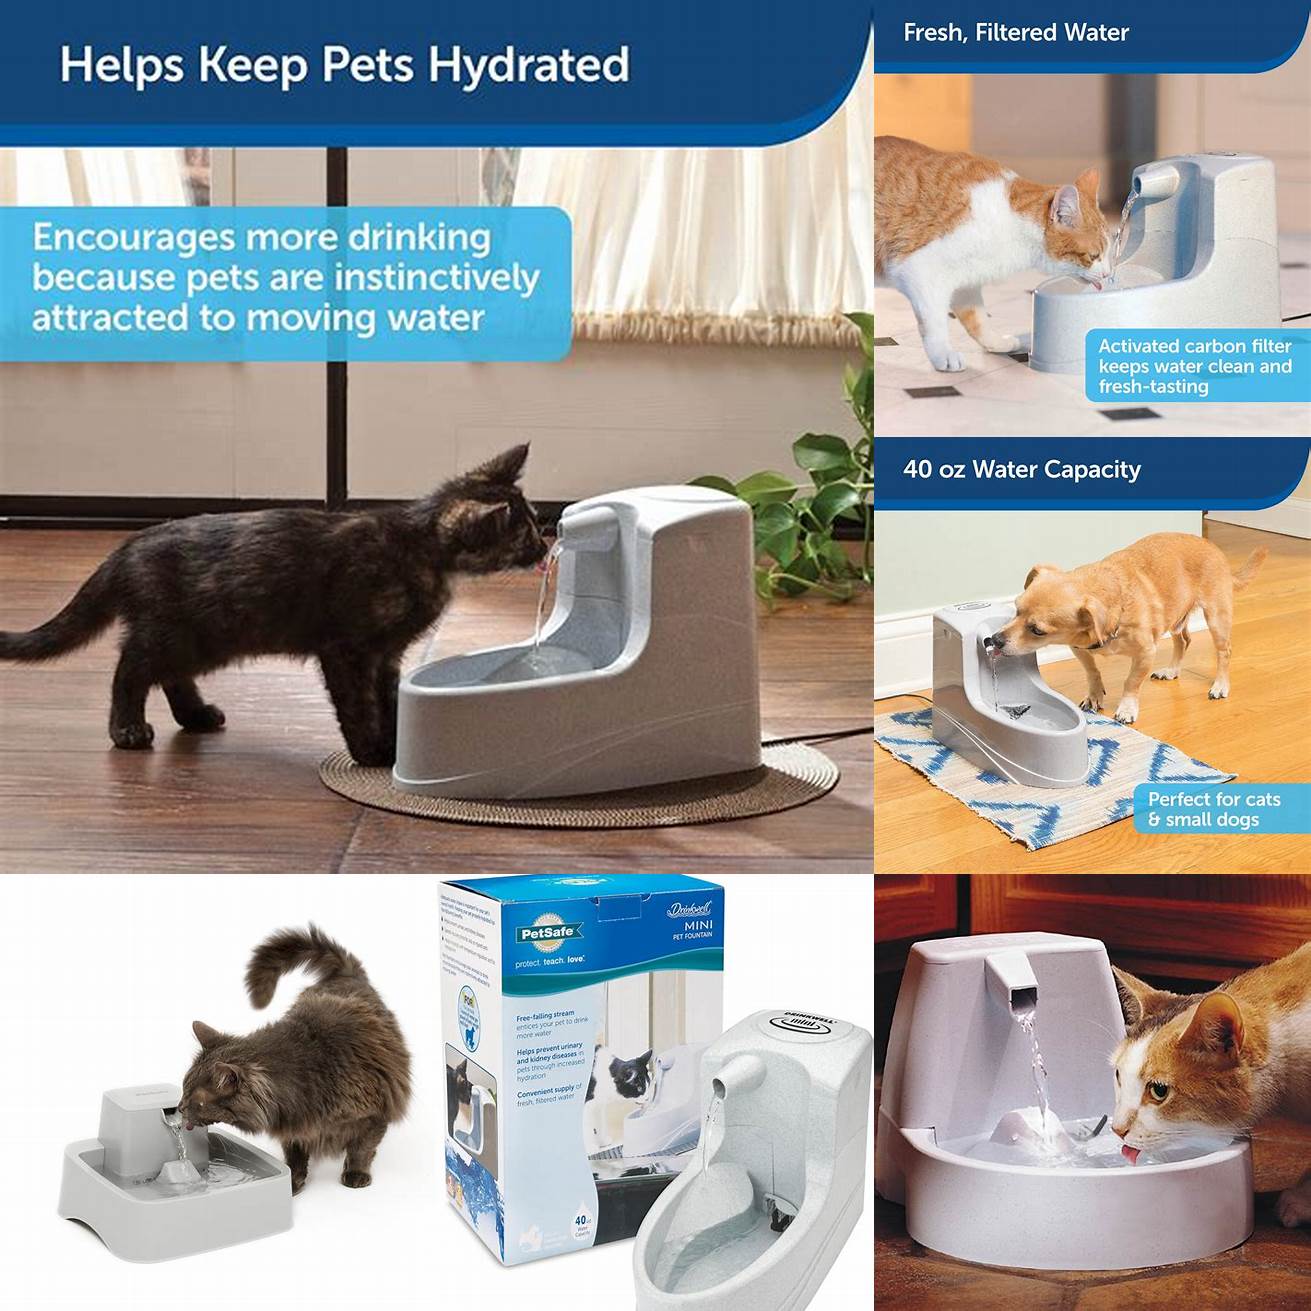 Encourages hydration The continuous circulation of water can attract pets to drink more often promoting proper hydration